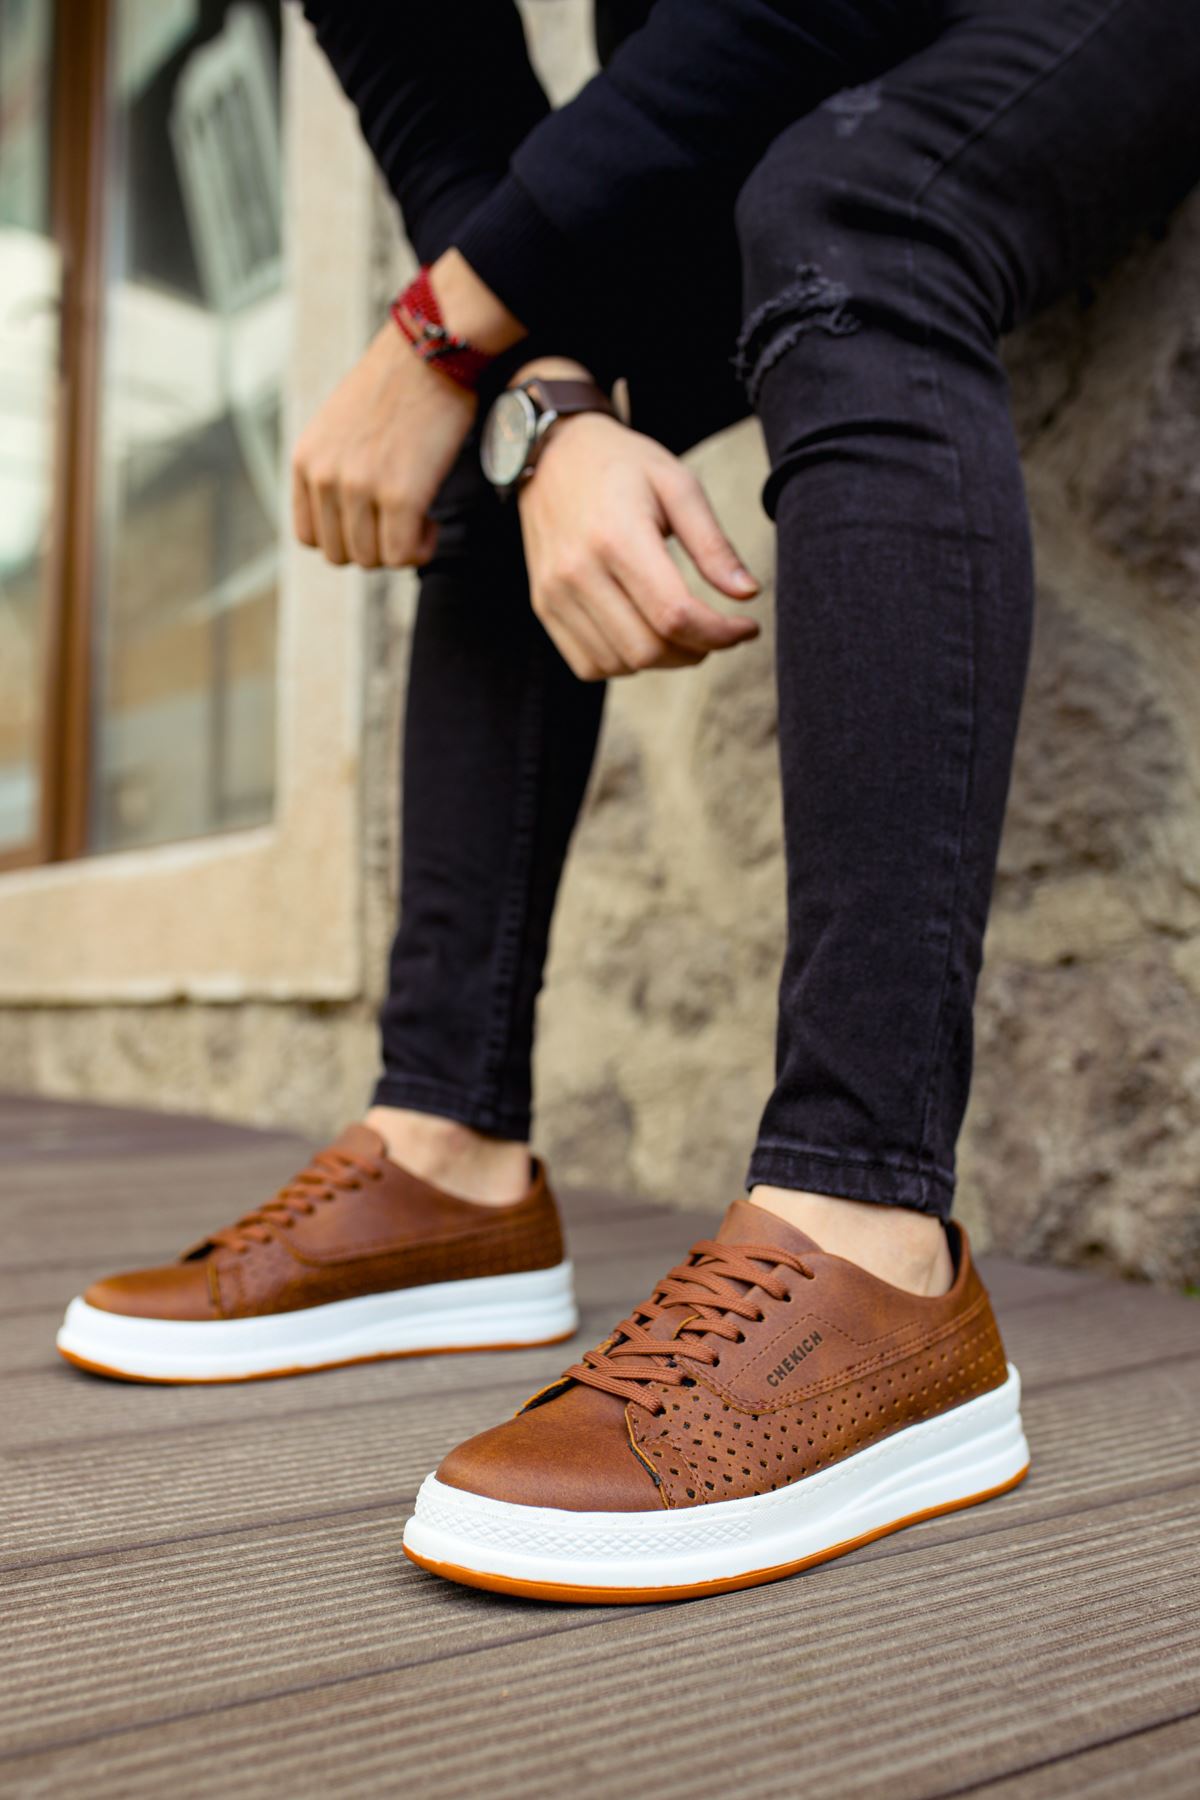 CH043 Men's Unisex Brown-White Sole Casual Shoes | STREETMODE ™